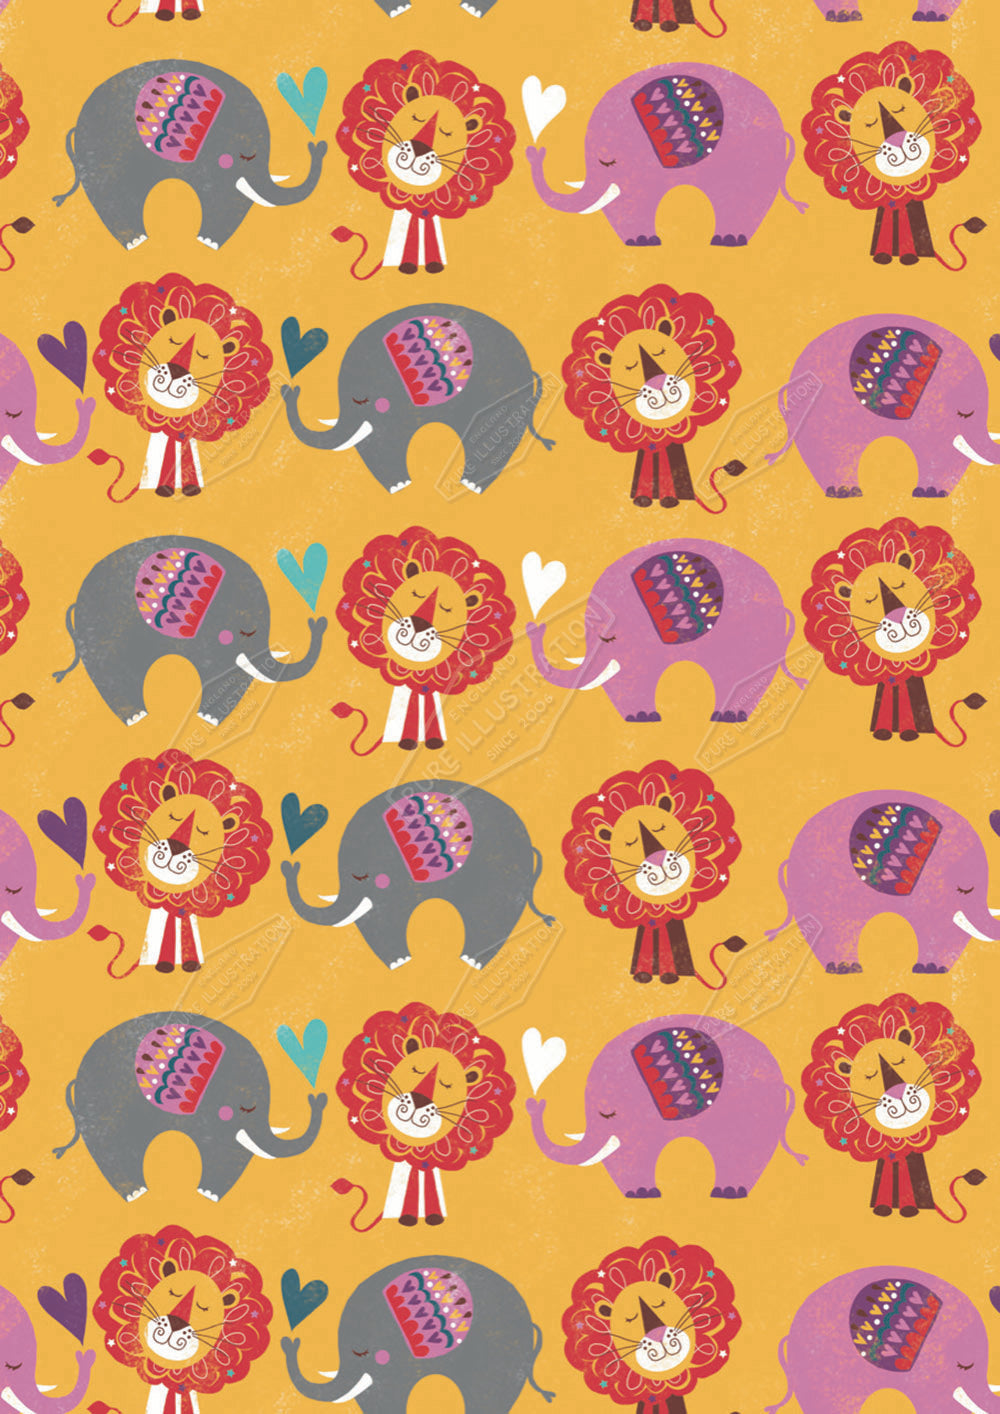 00030155KSP- Kerry Spurling is represented by Pure Art Licensing Agency - Birthday Pattern Design